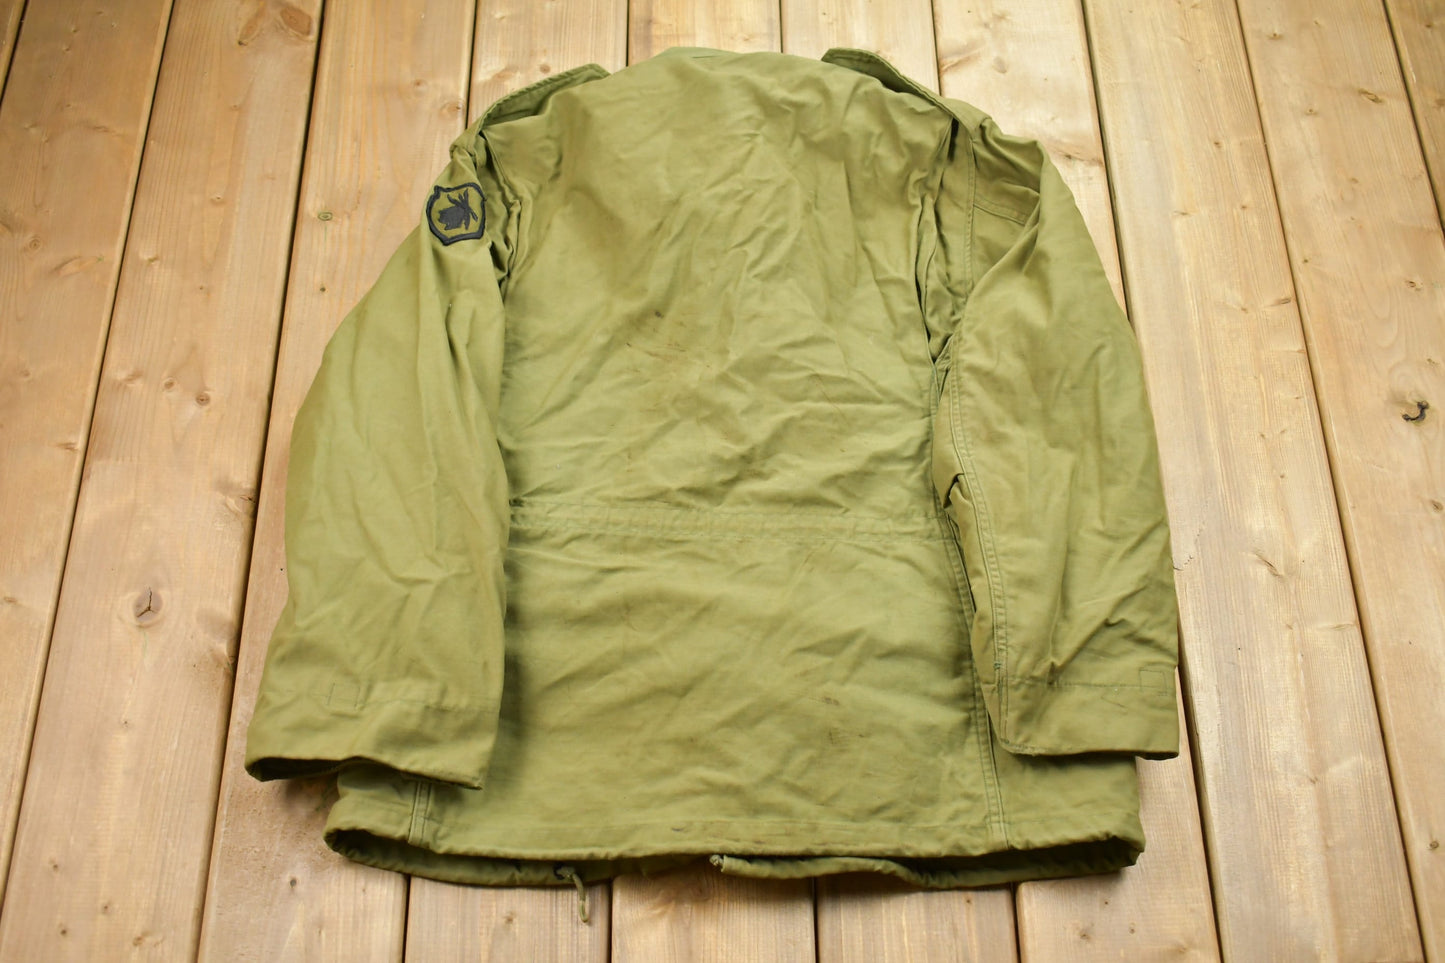 Vintage 1972 Military US Army Field Jacket / Button Up Jacket / US Army Green / Vintage Army / Streetwear Fashion / Army Jacket